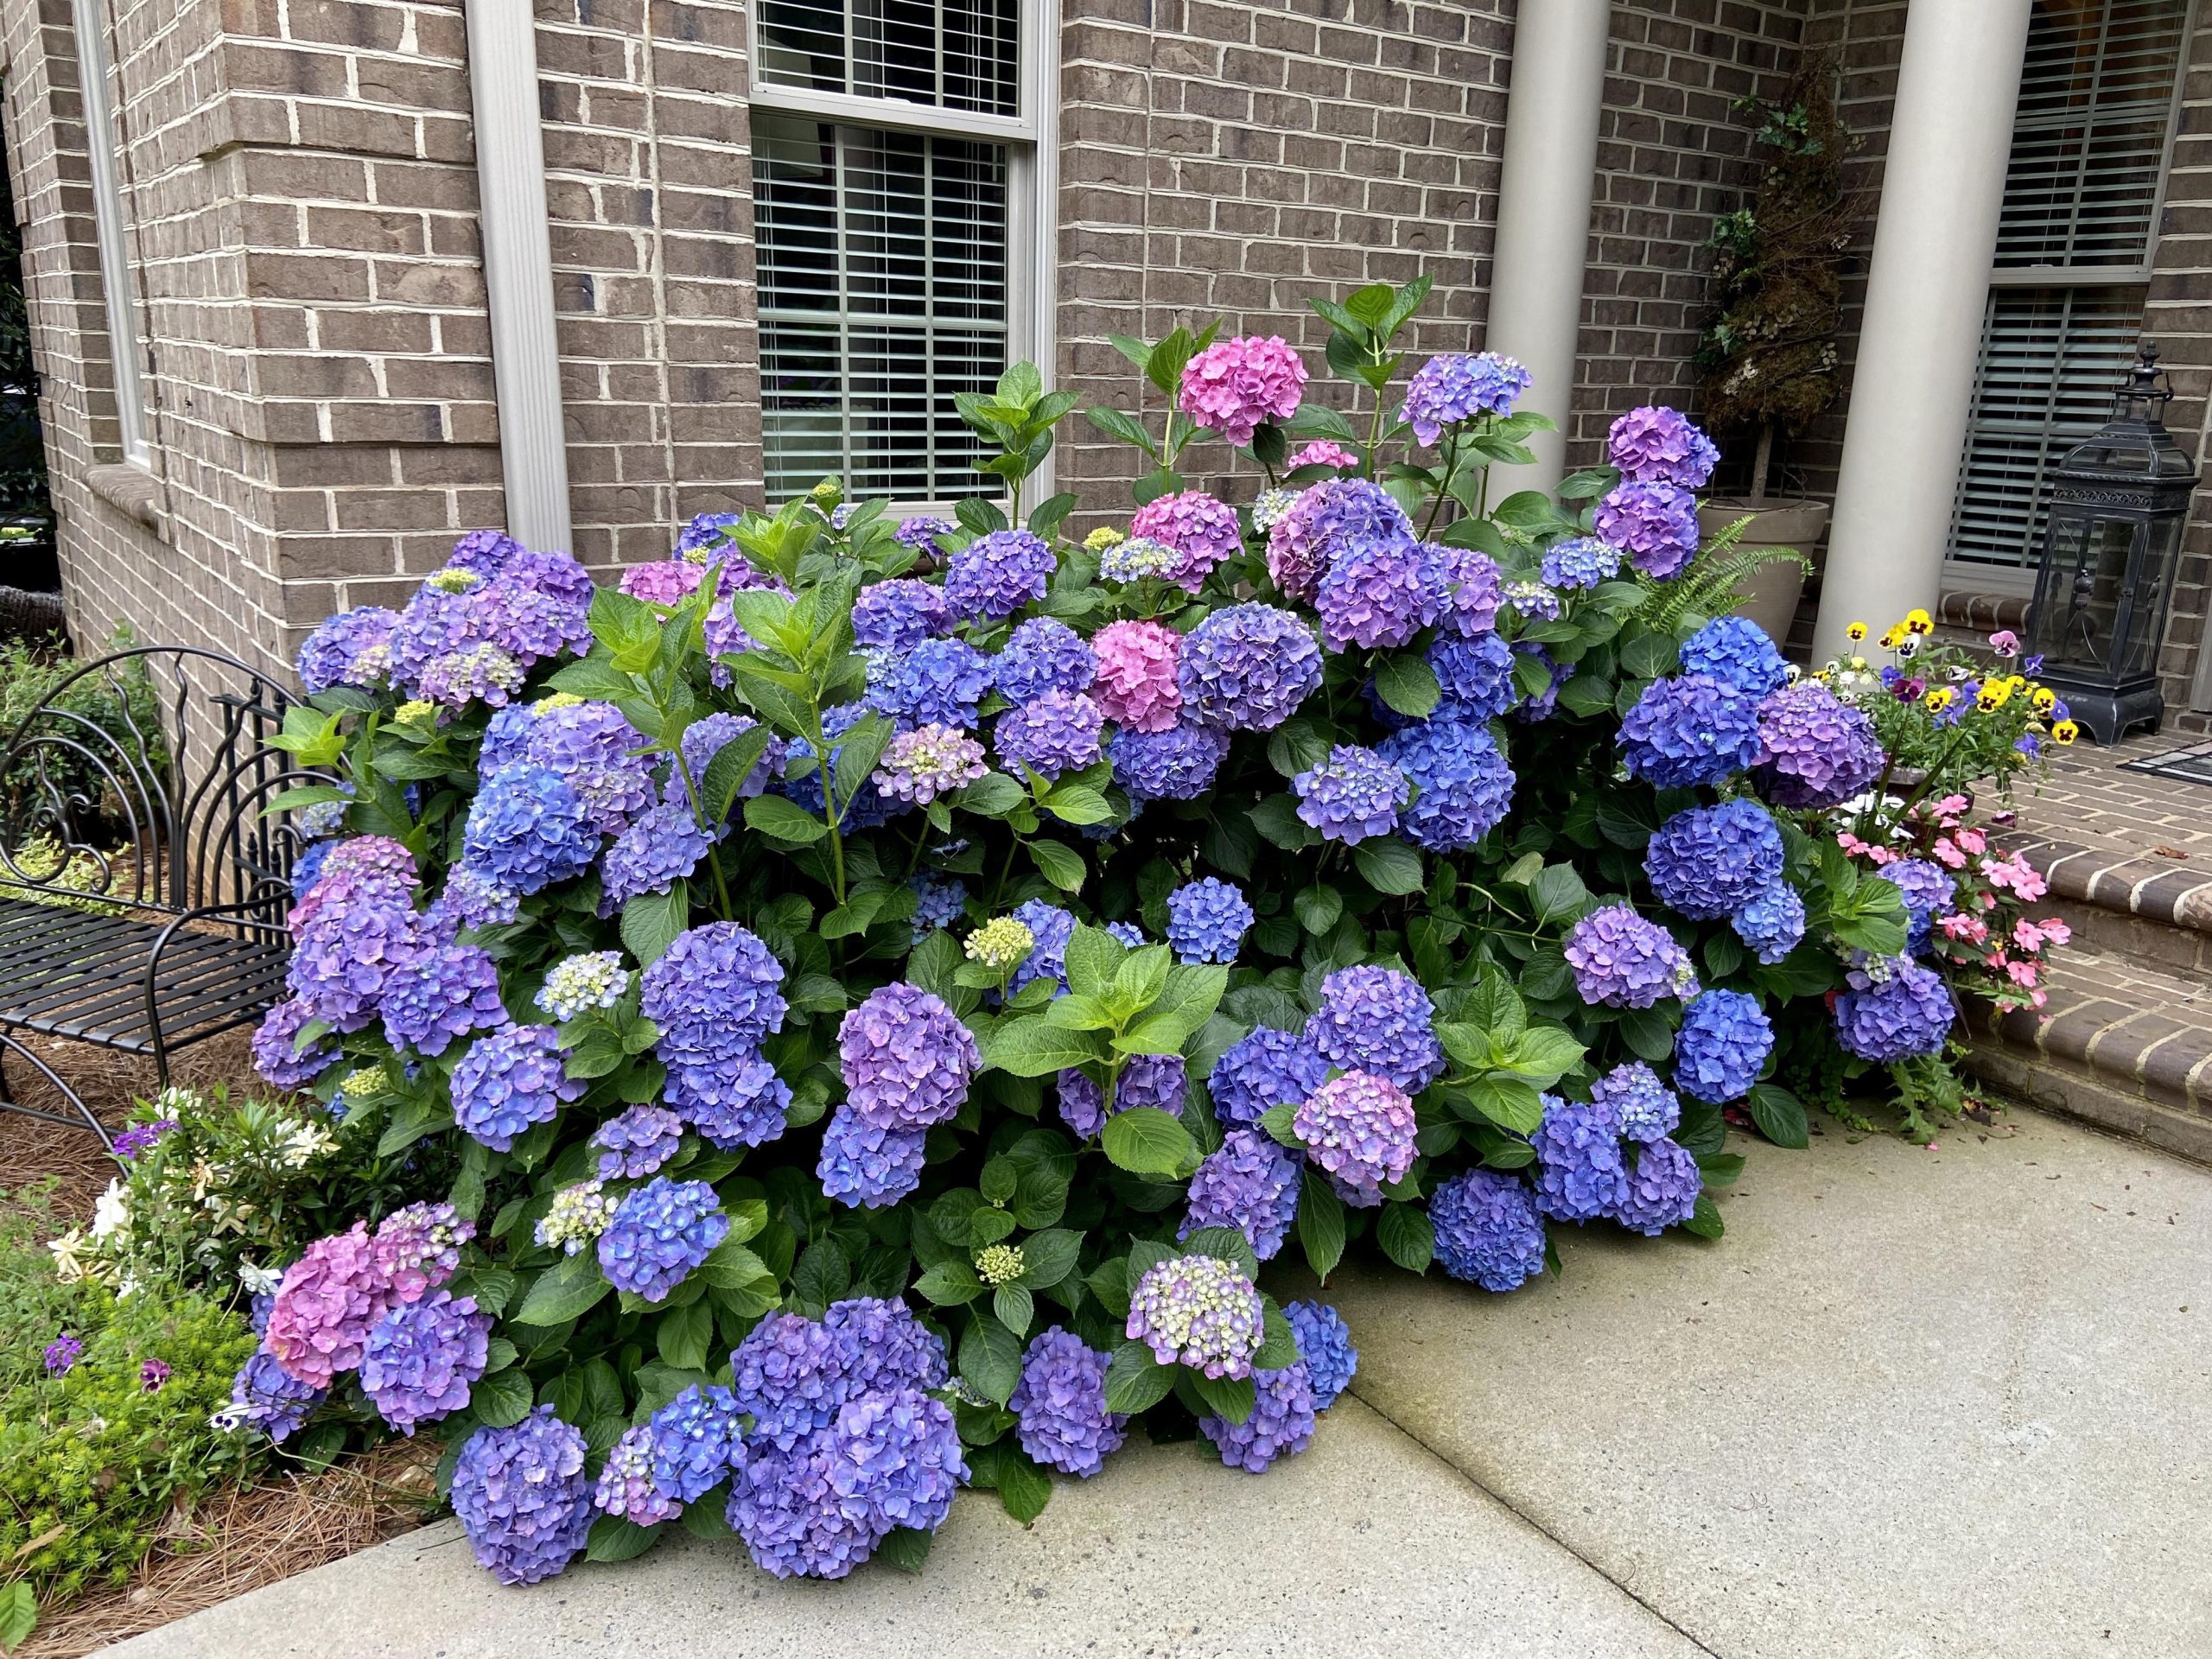 My Mom'S Hydrangea Bush Is Stunning This Year. She Is So Proud